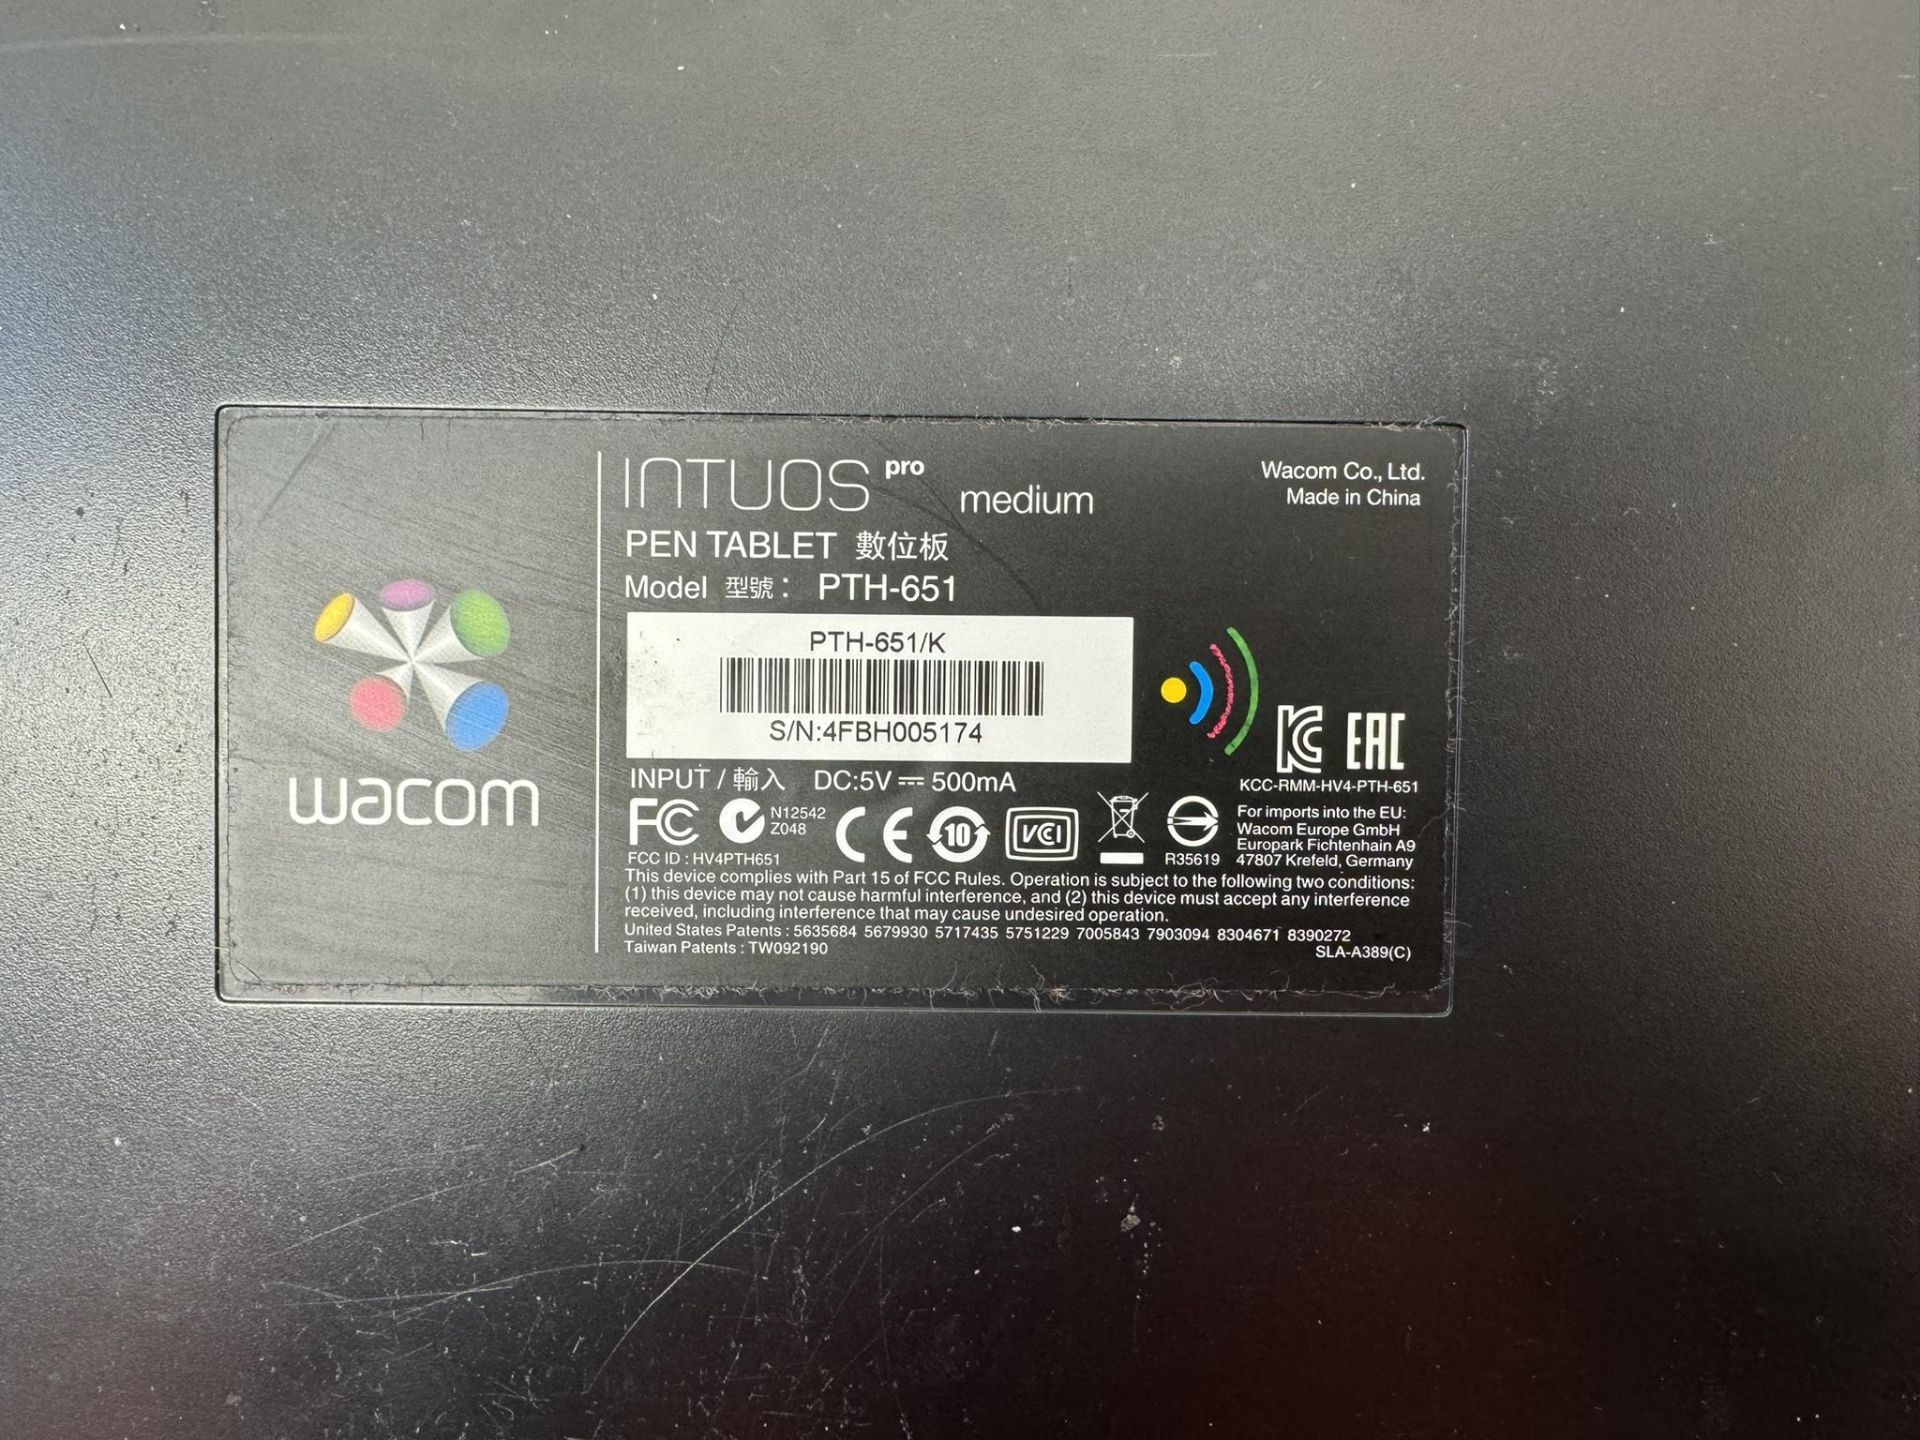 Wacom Intuos Pro Medium Pth651 Pen and Touch Tablet Without Pen - Image 2 of 2